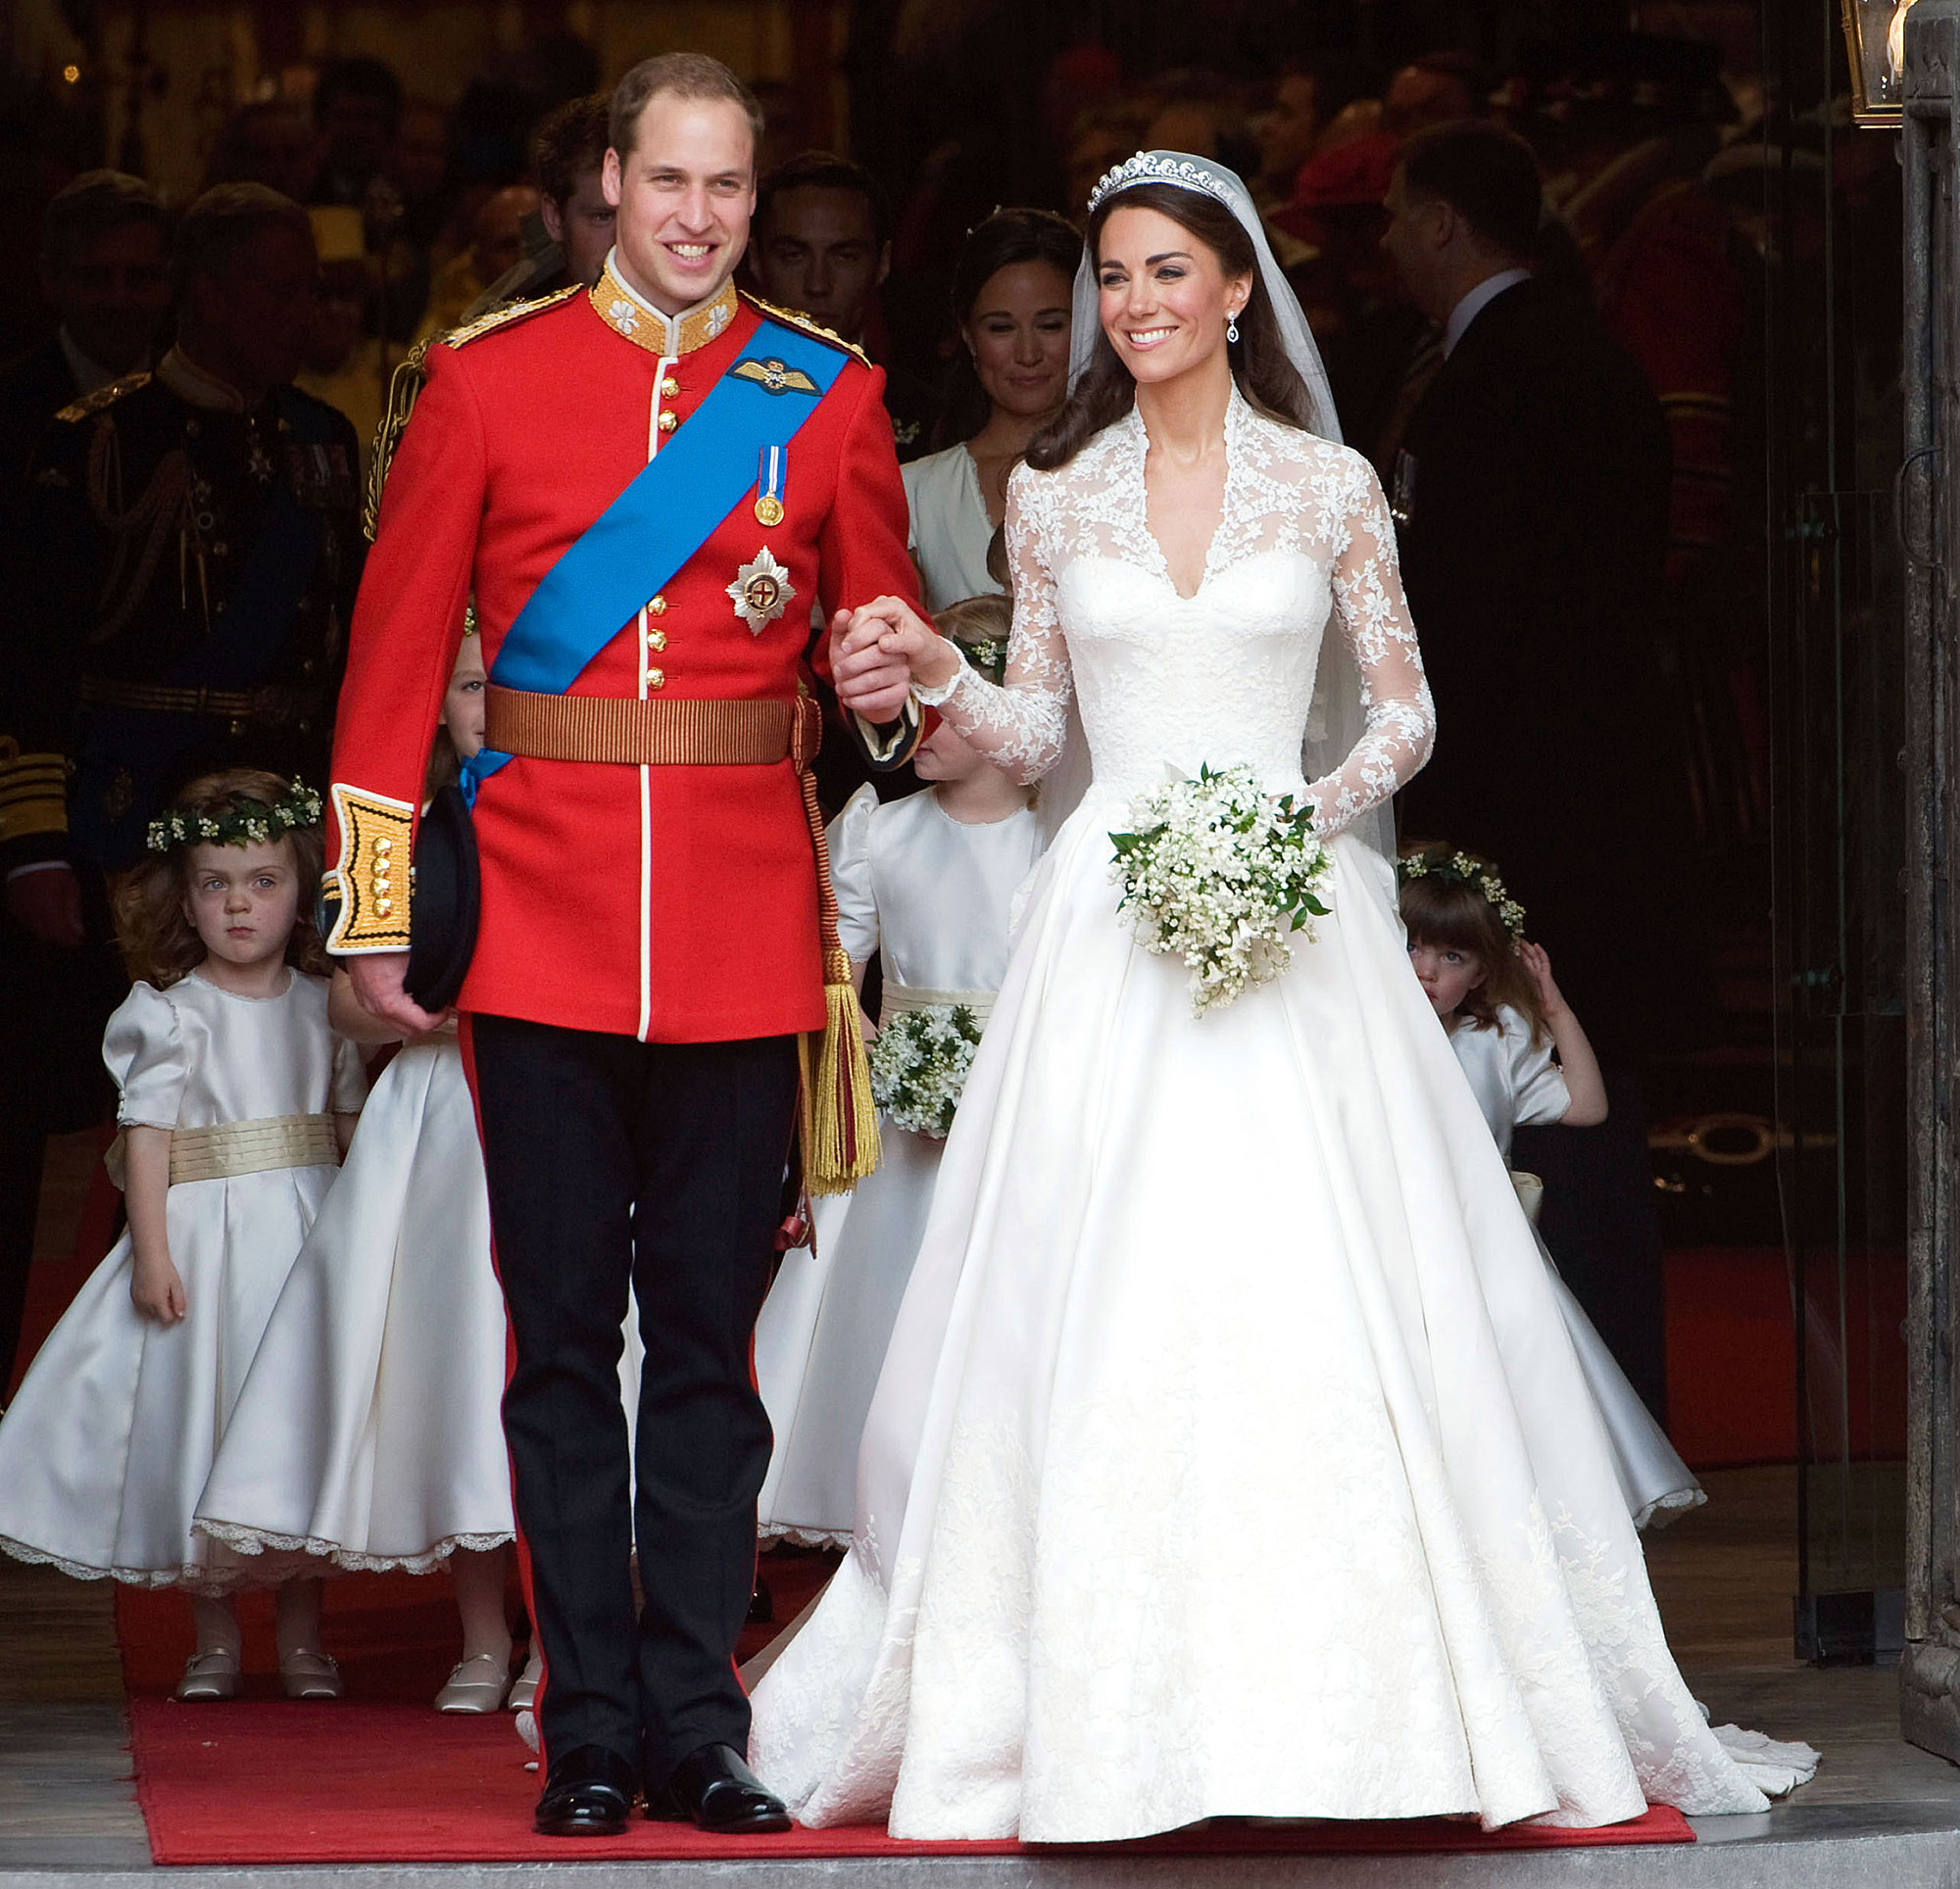 Prince Charles Reveals What Part of Prince William Wedding He Influenced